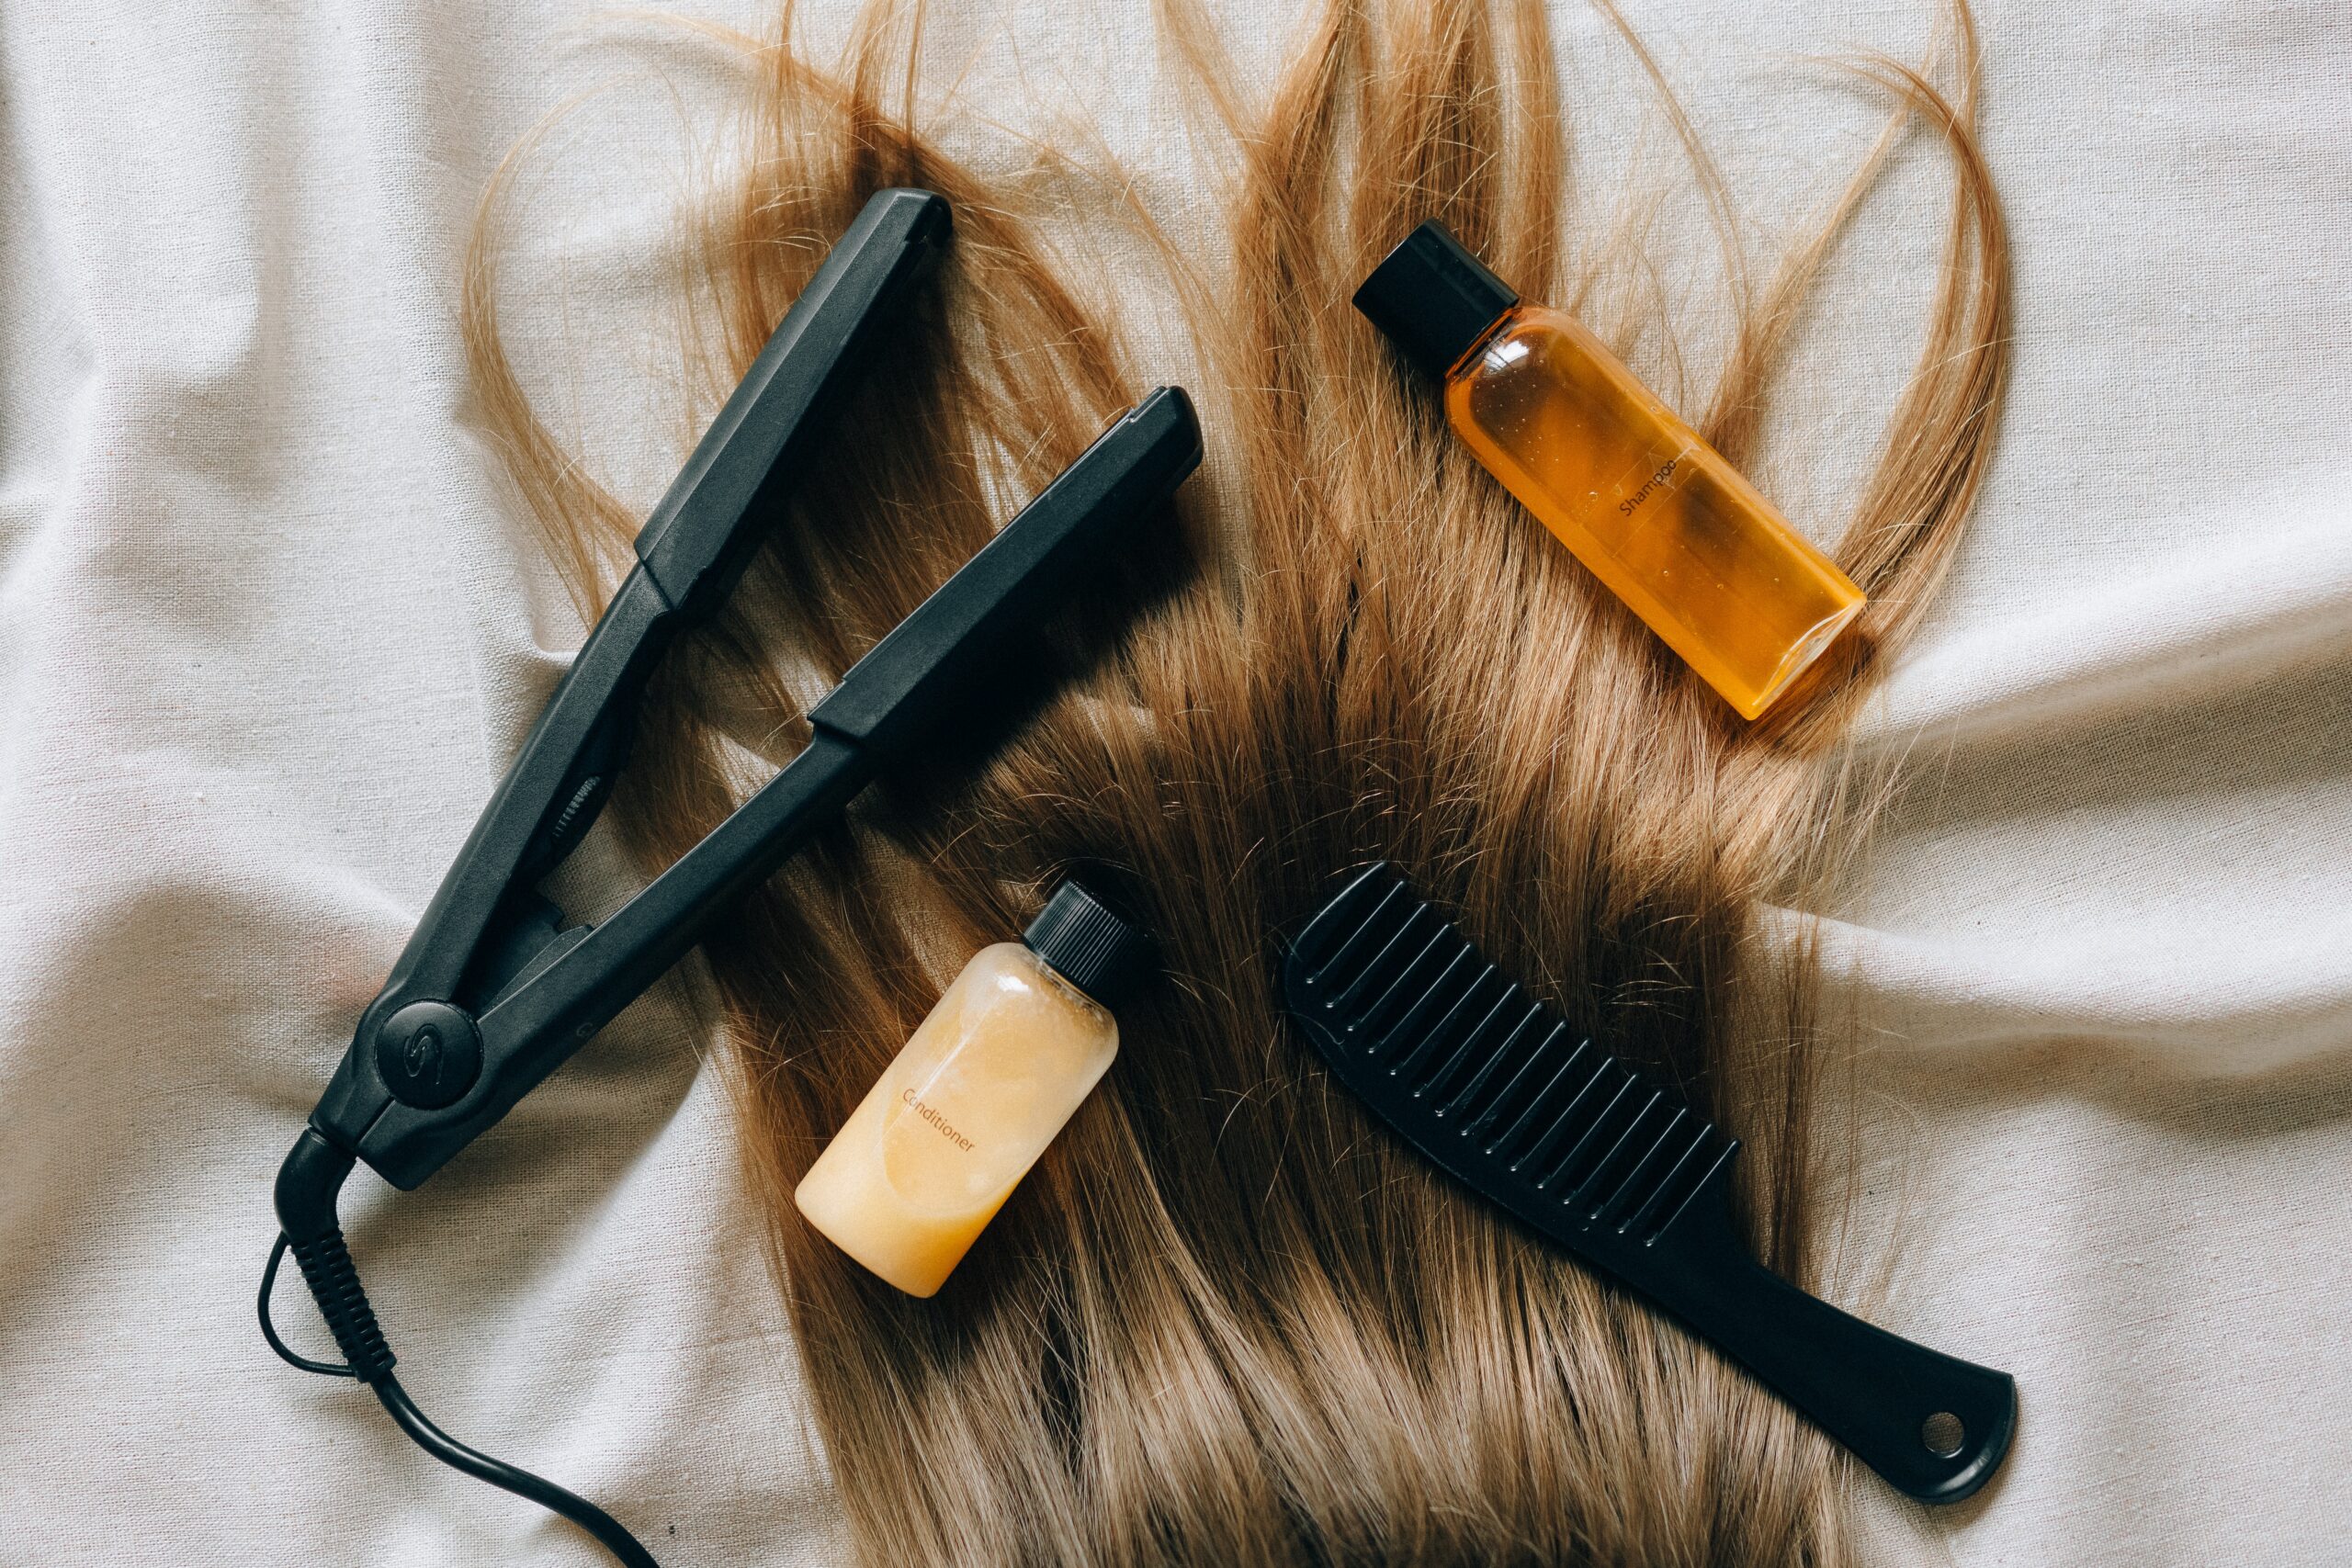 Hair Straightening Chemicals Linked to Cancer